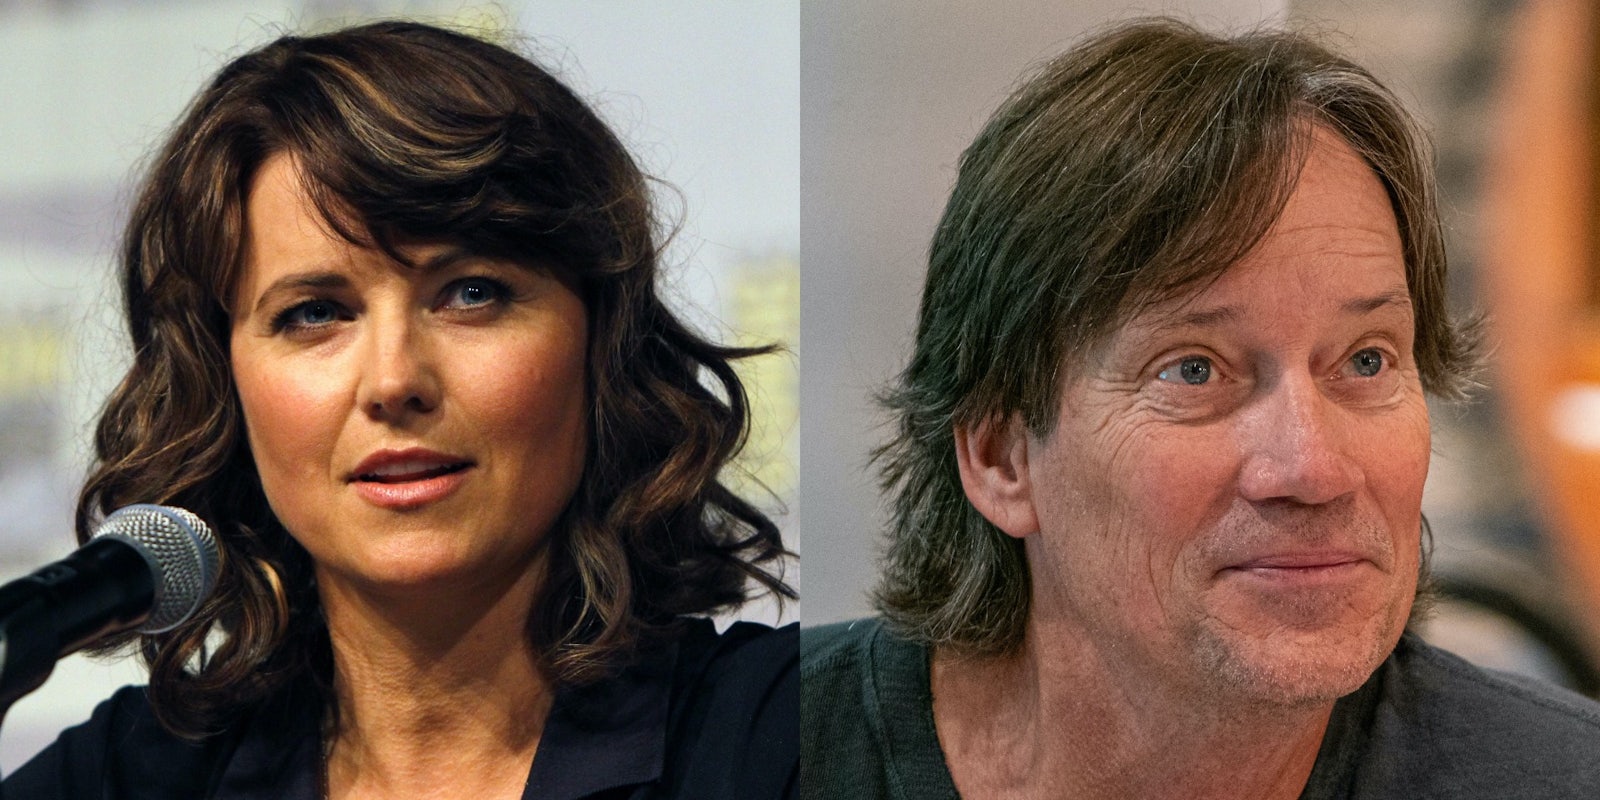 Lucy Lawless claps back at Kevin Sorbo on Twitter